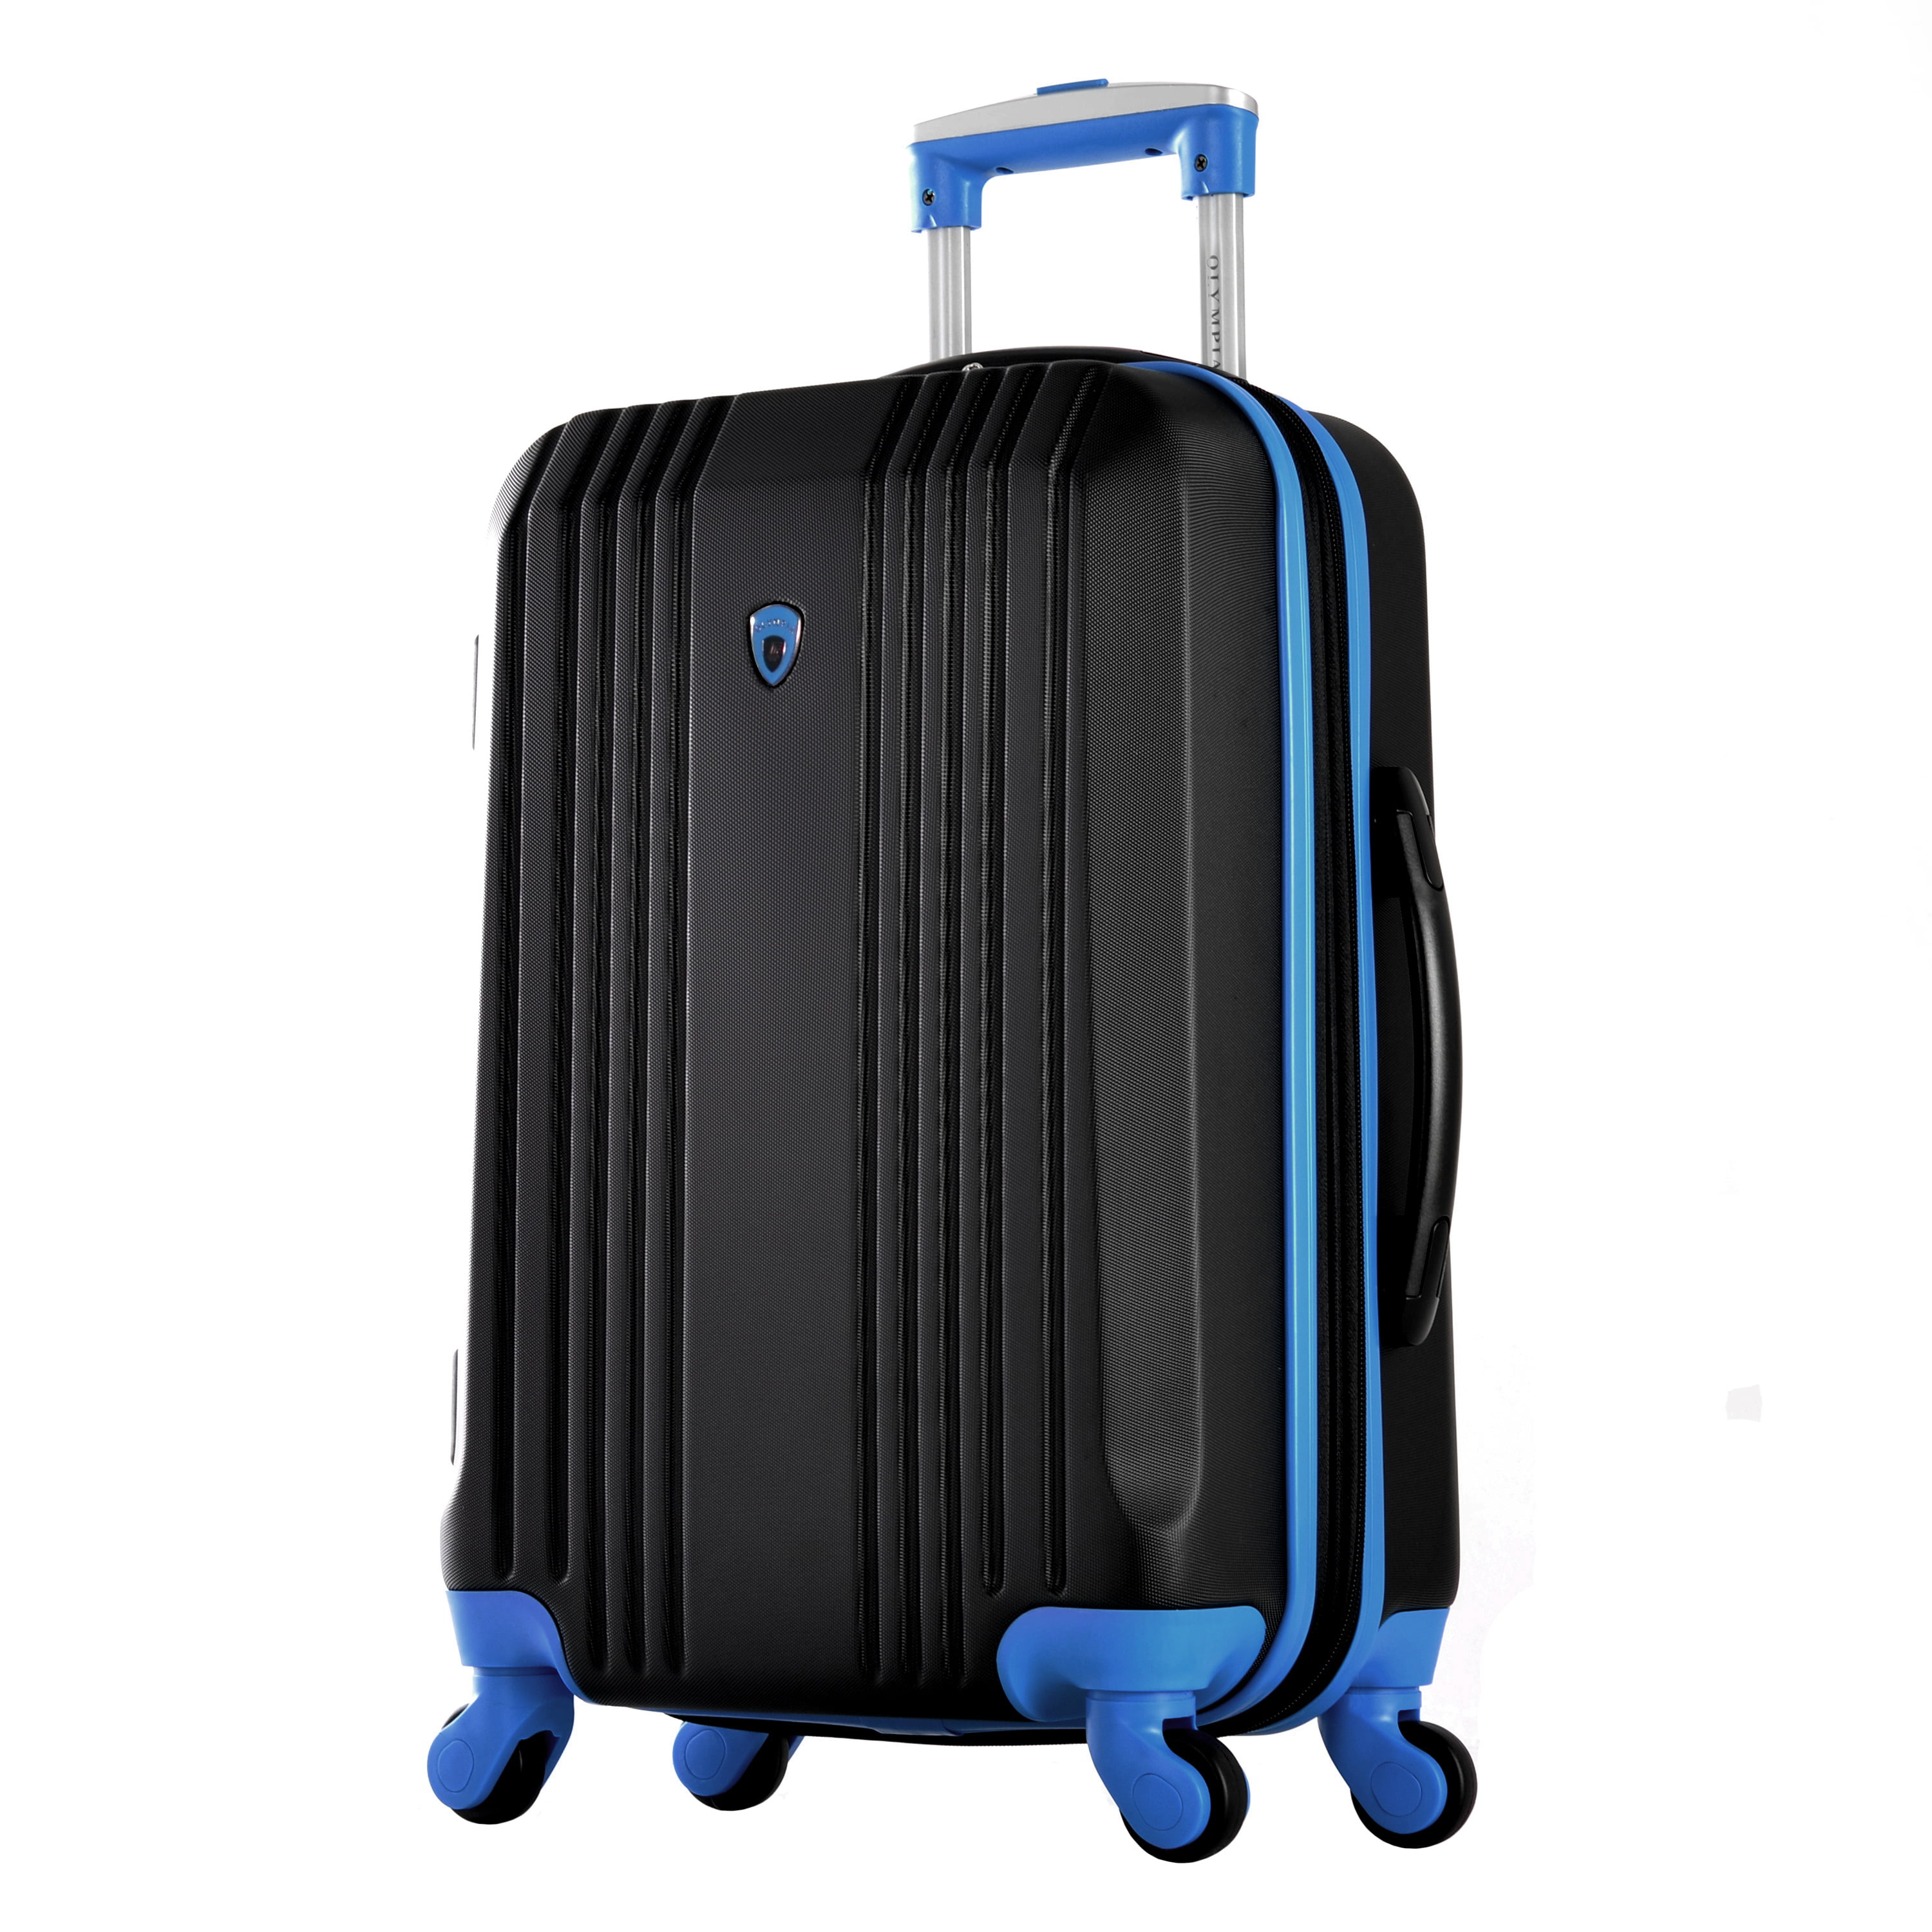 Olympia USA Apache 21" Carry-On Spinner W/ Hidden Compartment